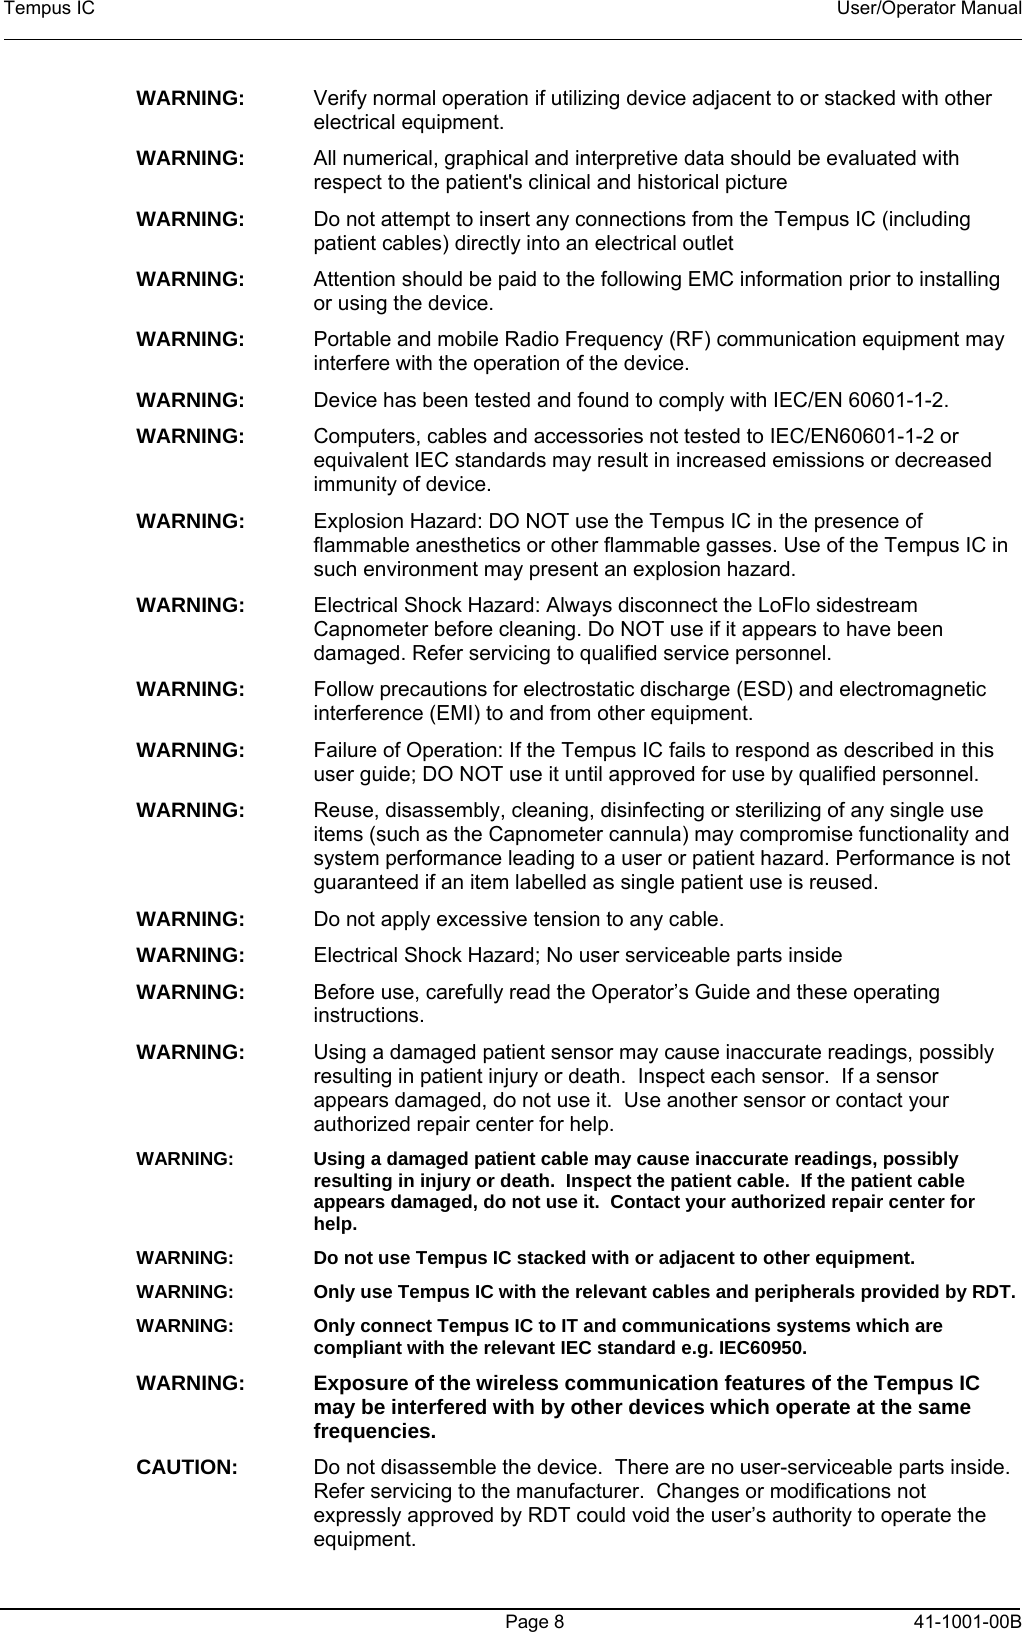 Tempus IC    User/Operator Manual     Page 8  41-1001-00B WARNING:   Verify normal operation if utilizing device adjacent to or stacked with other electrical equipment.  WARNING:   All numerical, graphical and interpretive data should be evaluated with respect to the patient&apos;s clinical and historical picture  WARNING:   Do not attempt to insert any connections from the Tempus IC (including patient cables) directly into an electrical outlet  WARNING:   Attention should be paid to the following EMC information prior to installing or using the device.  WARNING:   Portable and mobile Radio Frequency (RF) communication equipment may interfere with the operation of the device. WARNING:   Device has been tested and found to comply with IEC/EN 60601-1-2. WARNING:   Computers, cables and accessories not tested to IEC/EN60601-1-2 or equivalent IEC standards may result in increased emissions or decreased immunity of device.  WARNING:  Explosion Hazard: DO NOT use the Tempus IC in the presence of flammable anesthetics or other flammable gasses. Use of the Tempus IC in such environment may present an explosion hazard. WARNING:  Electrical Shock Hazard: Always disconnect the LoFlo sidestream Capnometer before cleaning. Do NOT use if it appears to have been damaged. Refer servicing to qualified service personnel. WARNING:  Follow precautions for electrostatic discharge (ESD) and electromagnetic interference (EMI) to and from other equipment. WARNING:  Failure of Operation: If the Tempus IC fails to respond as described in this user guide; DO NOT use it until approved for use by qualified personnel. WARNING:  Reuse, disassembly, cleaning, disinfecting or sterilizing of any single use items (such as the Capnometer cannula) may compromise functionality and system performance leading to a user or patient hazard. Performance is not guaranteed if an item labelled as single patient use is reused. WARNING:  Do not apply excessive tension to any cable. WARNING:  Electrical Shock Hazard; No user serviceable parts inside WARNING:  Before use, carefully read the Operator’s Guide and these operating instructions. WARNING:    Using a damaged patient sensor may cause inaccurate readings, possibly resulting in patient injury or death.  Inspect each sensor.  If a sensor appears damaged, do not use it.  Use another sensor or contact your authorized repair center for help. WARNING:    Using a damaged patient cable may cause inaccurate readings, possibly resulting in injury or death.  Inspect the patient cable.  If the patient cable appears damaged, do not use it.  Contact your authorized repair center for help. WARNING:    Do not use Tempus IC stacked with or adjacent to other equipment.   WARNING:    Only use Tempus IC with the relevant cables and peripherals provided by RDT.  WARNING:    Only connect Tempus IC to IT and communications systems which are compliant with the relevant IEC standard e.g. IEC60950. WARNING:    Exposure of the wireless communication features of the Tempus IC may be interfered with by other devices which operate at the same frequencies. CAUTION:  Do not disassemble the device.  There are no user-serviceable parts inside.  Refer servicing to the manufacturer.  Changes or modifications not expressly approved by RDT could void the user’s authority to operate the equipment. 